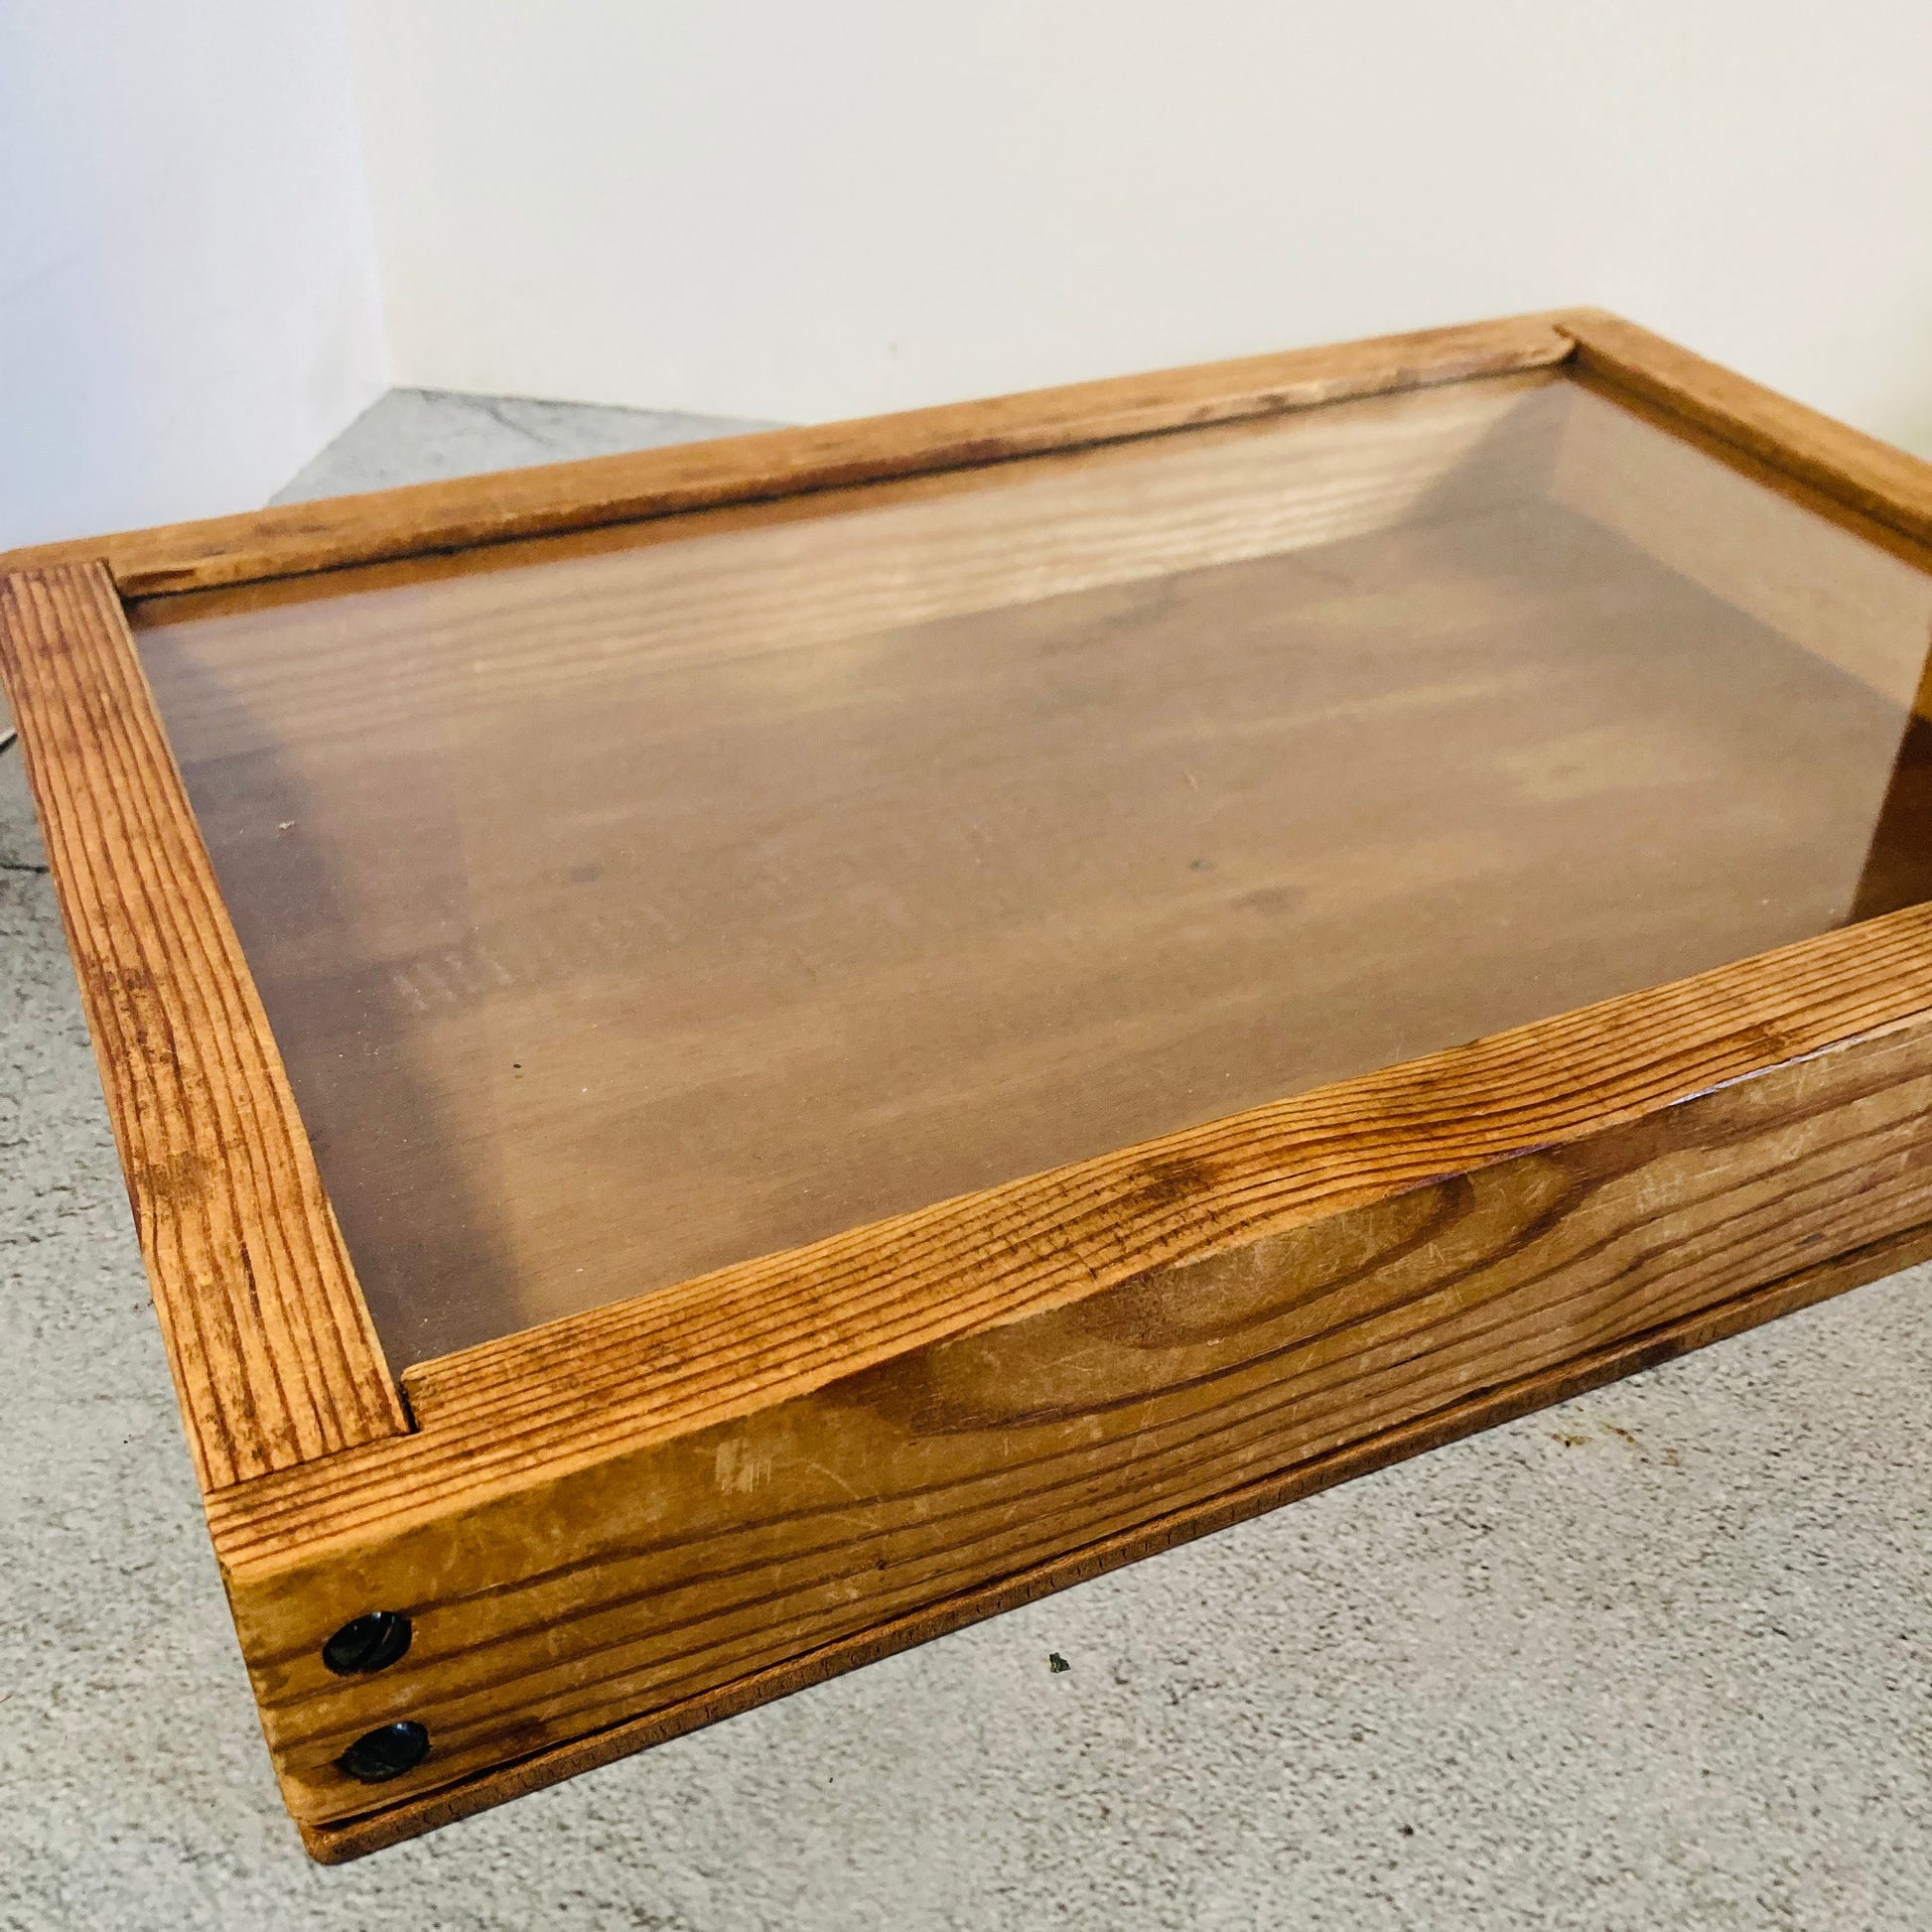 Vintage Wooden and Glass Shadow Display Box Frame